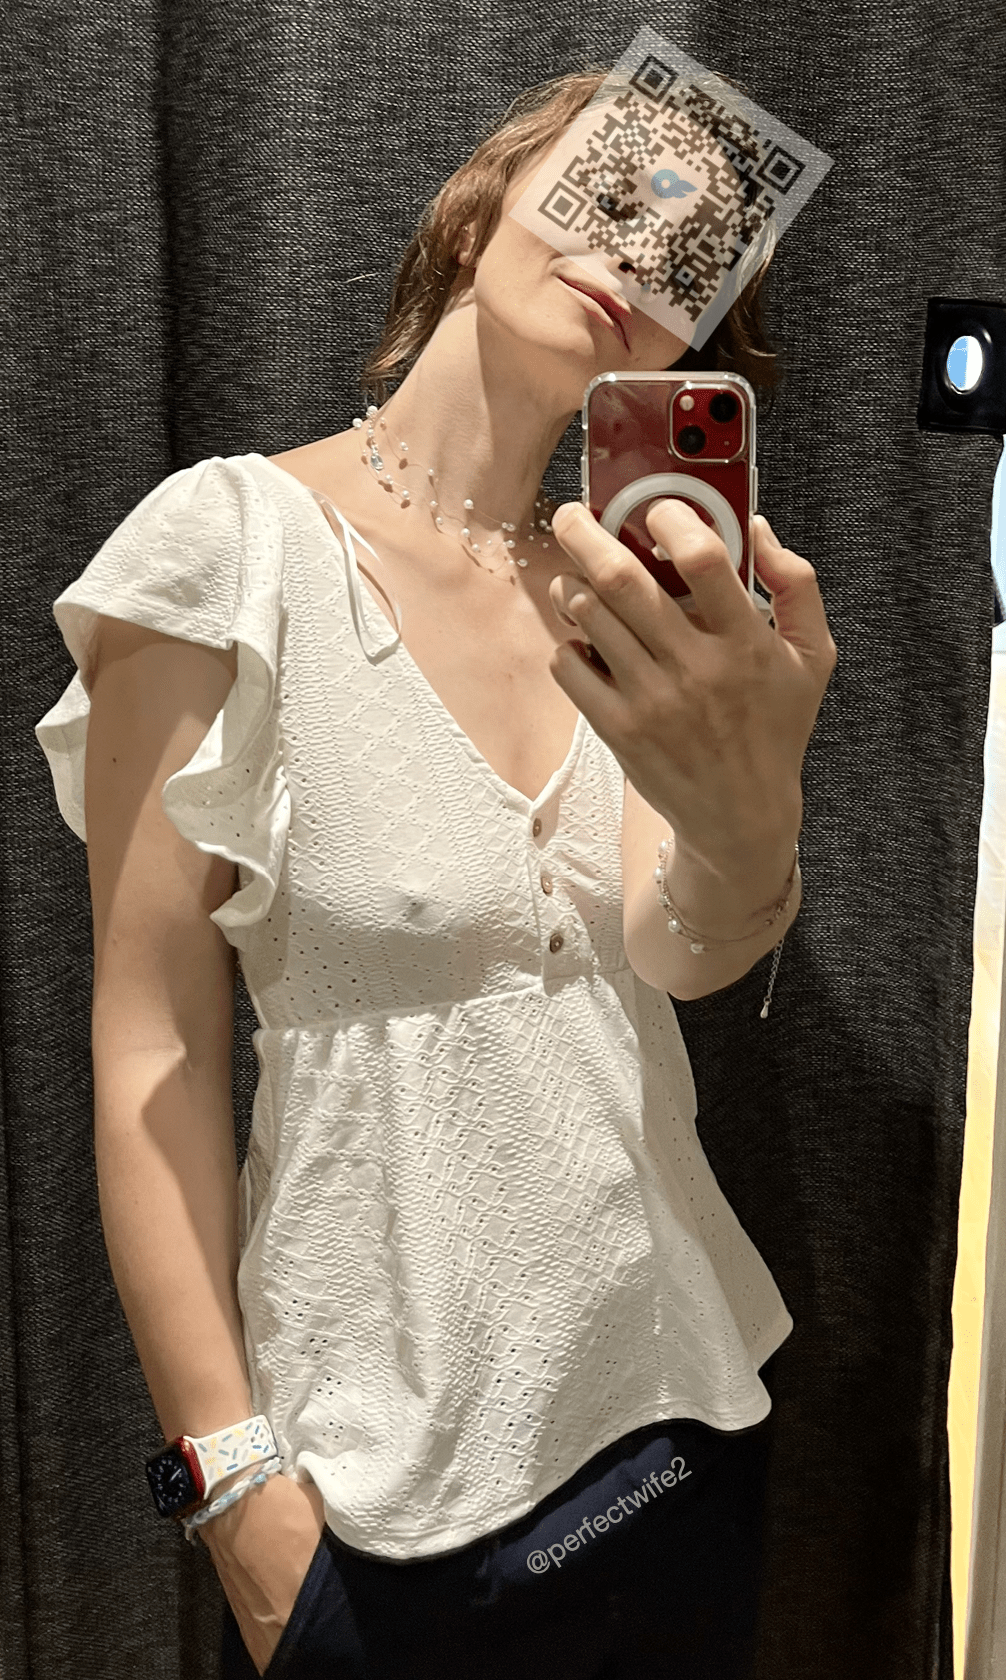 Photo by Perfectwife2 with the username @Perfectwife2, who is a star user,  June 18, 2023 at 12:19 AM. The post is about the topic MILFS and the text says 'SexySaturday shopping!
I've bought one of these outfits, can you guess which one? 
Might send the first ones to guess right a DM of me wearing it...

🔗 Link in bio for more uncensored content'